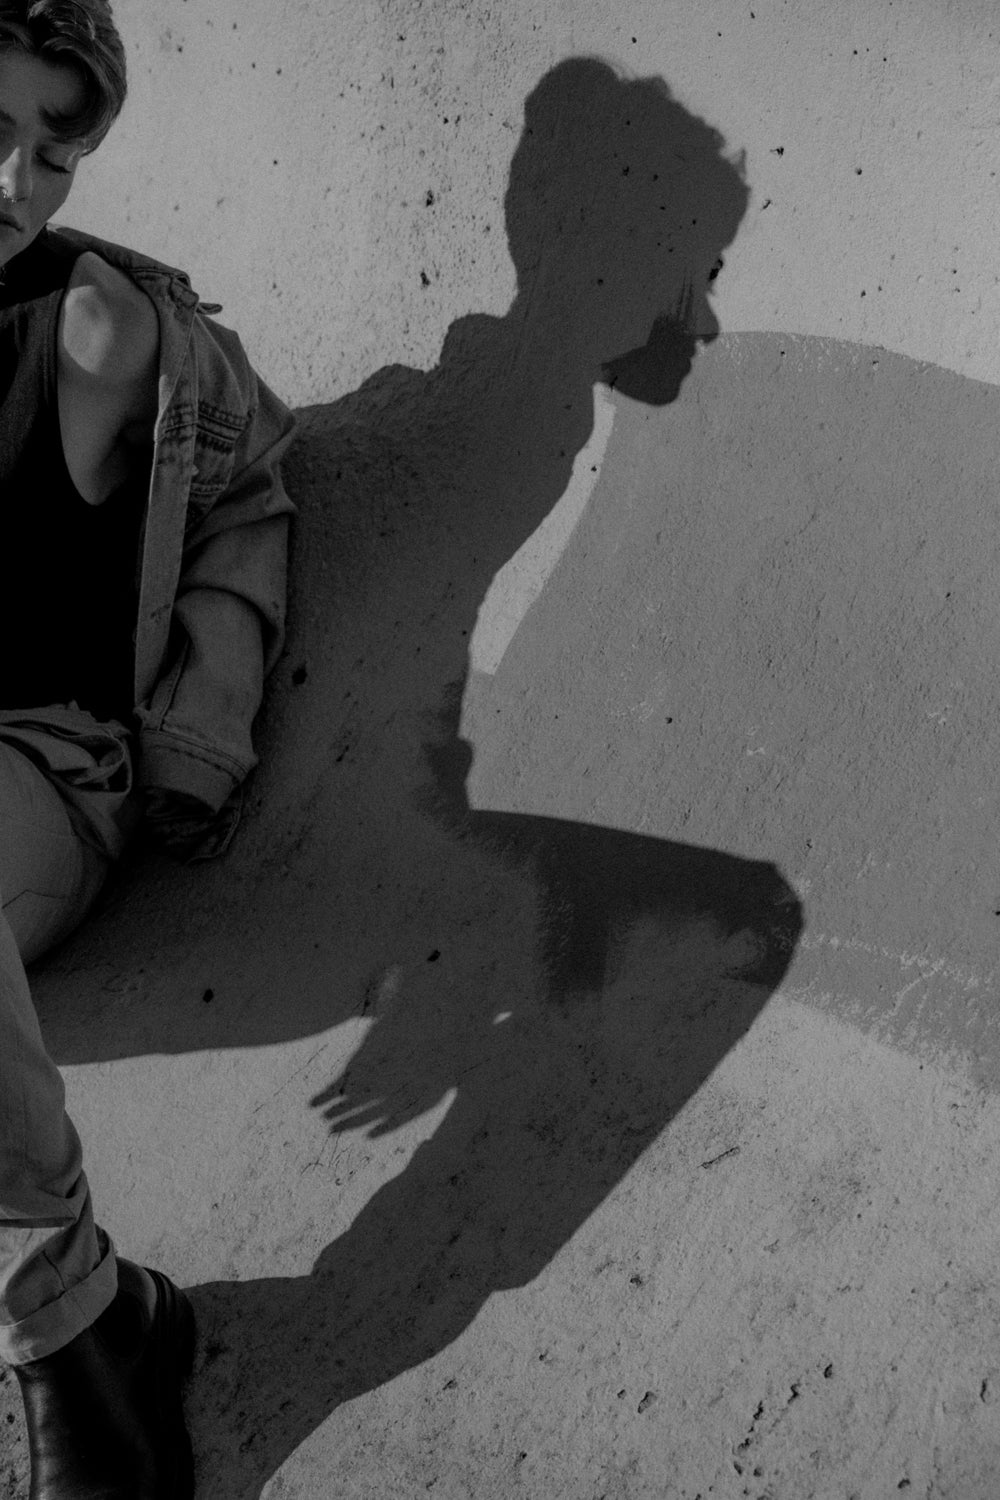 Non binary model leaning against grungy cement wall. The model is cropped and the focus of the image is on the shadow. They are wearing a jean jacket and have short hair.